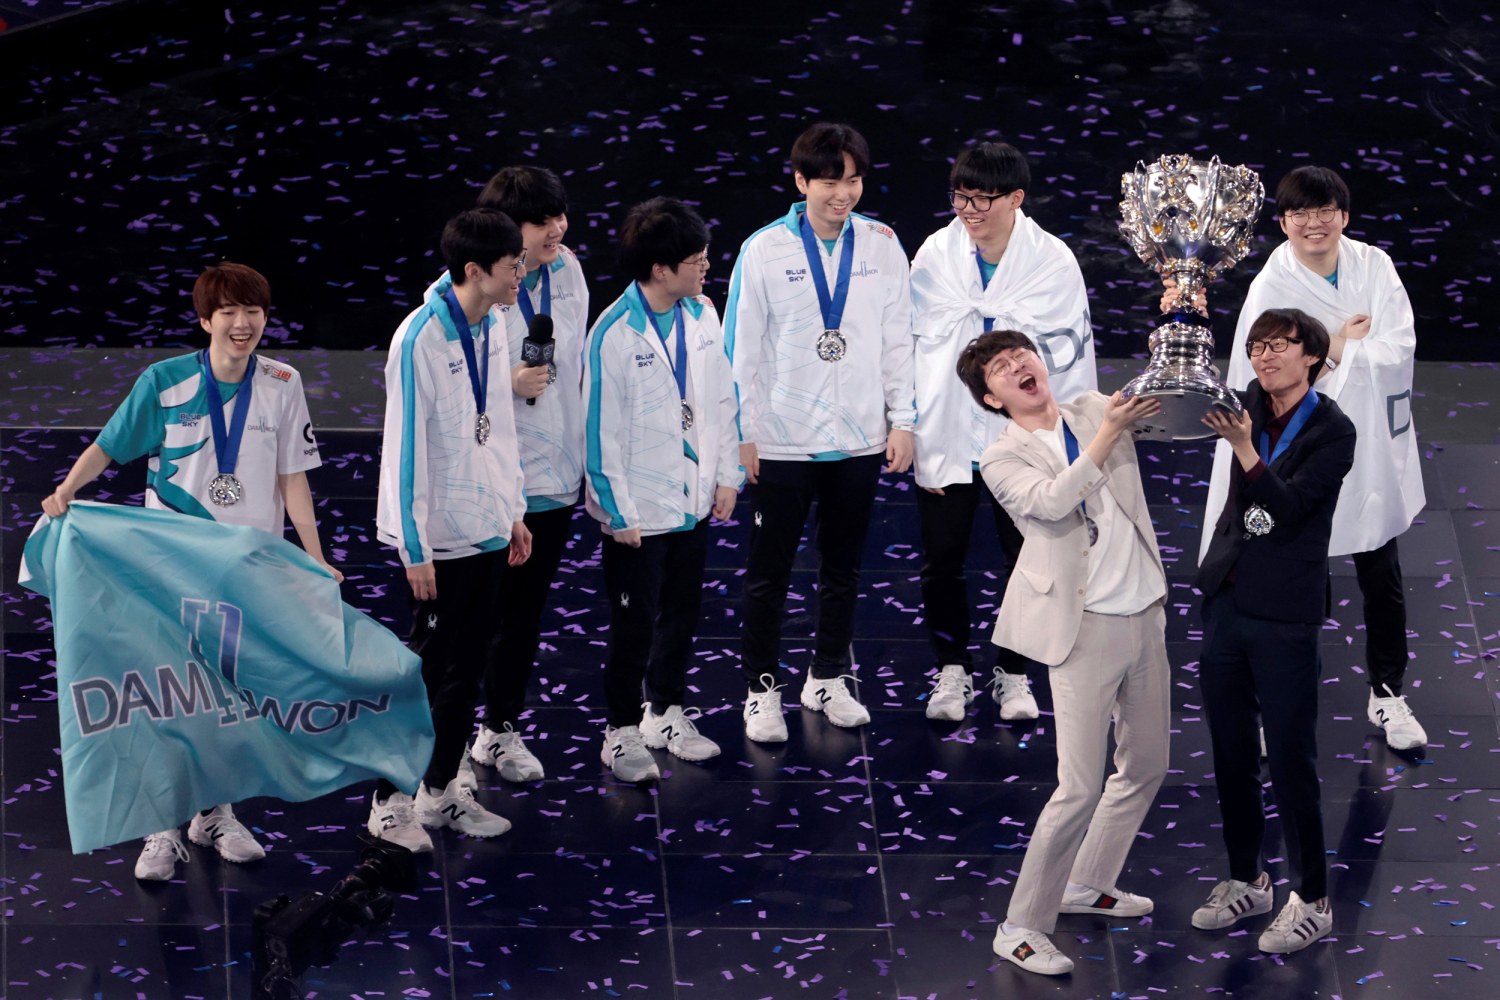 DAMWON Gaming defeats Suning and win Worlds 2020 - League of Legends